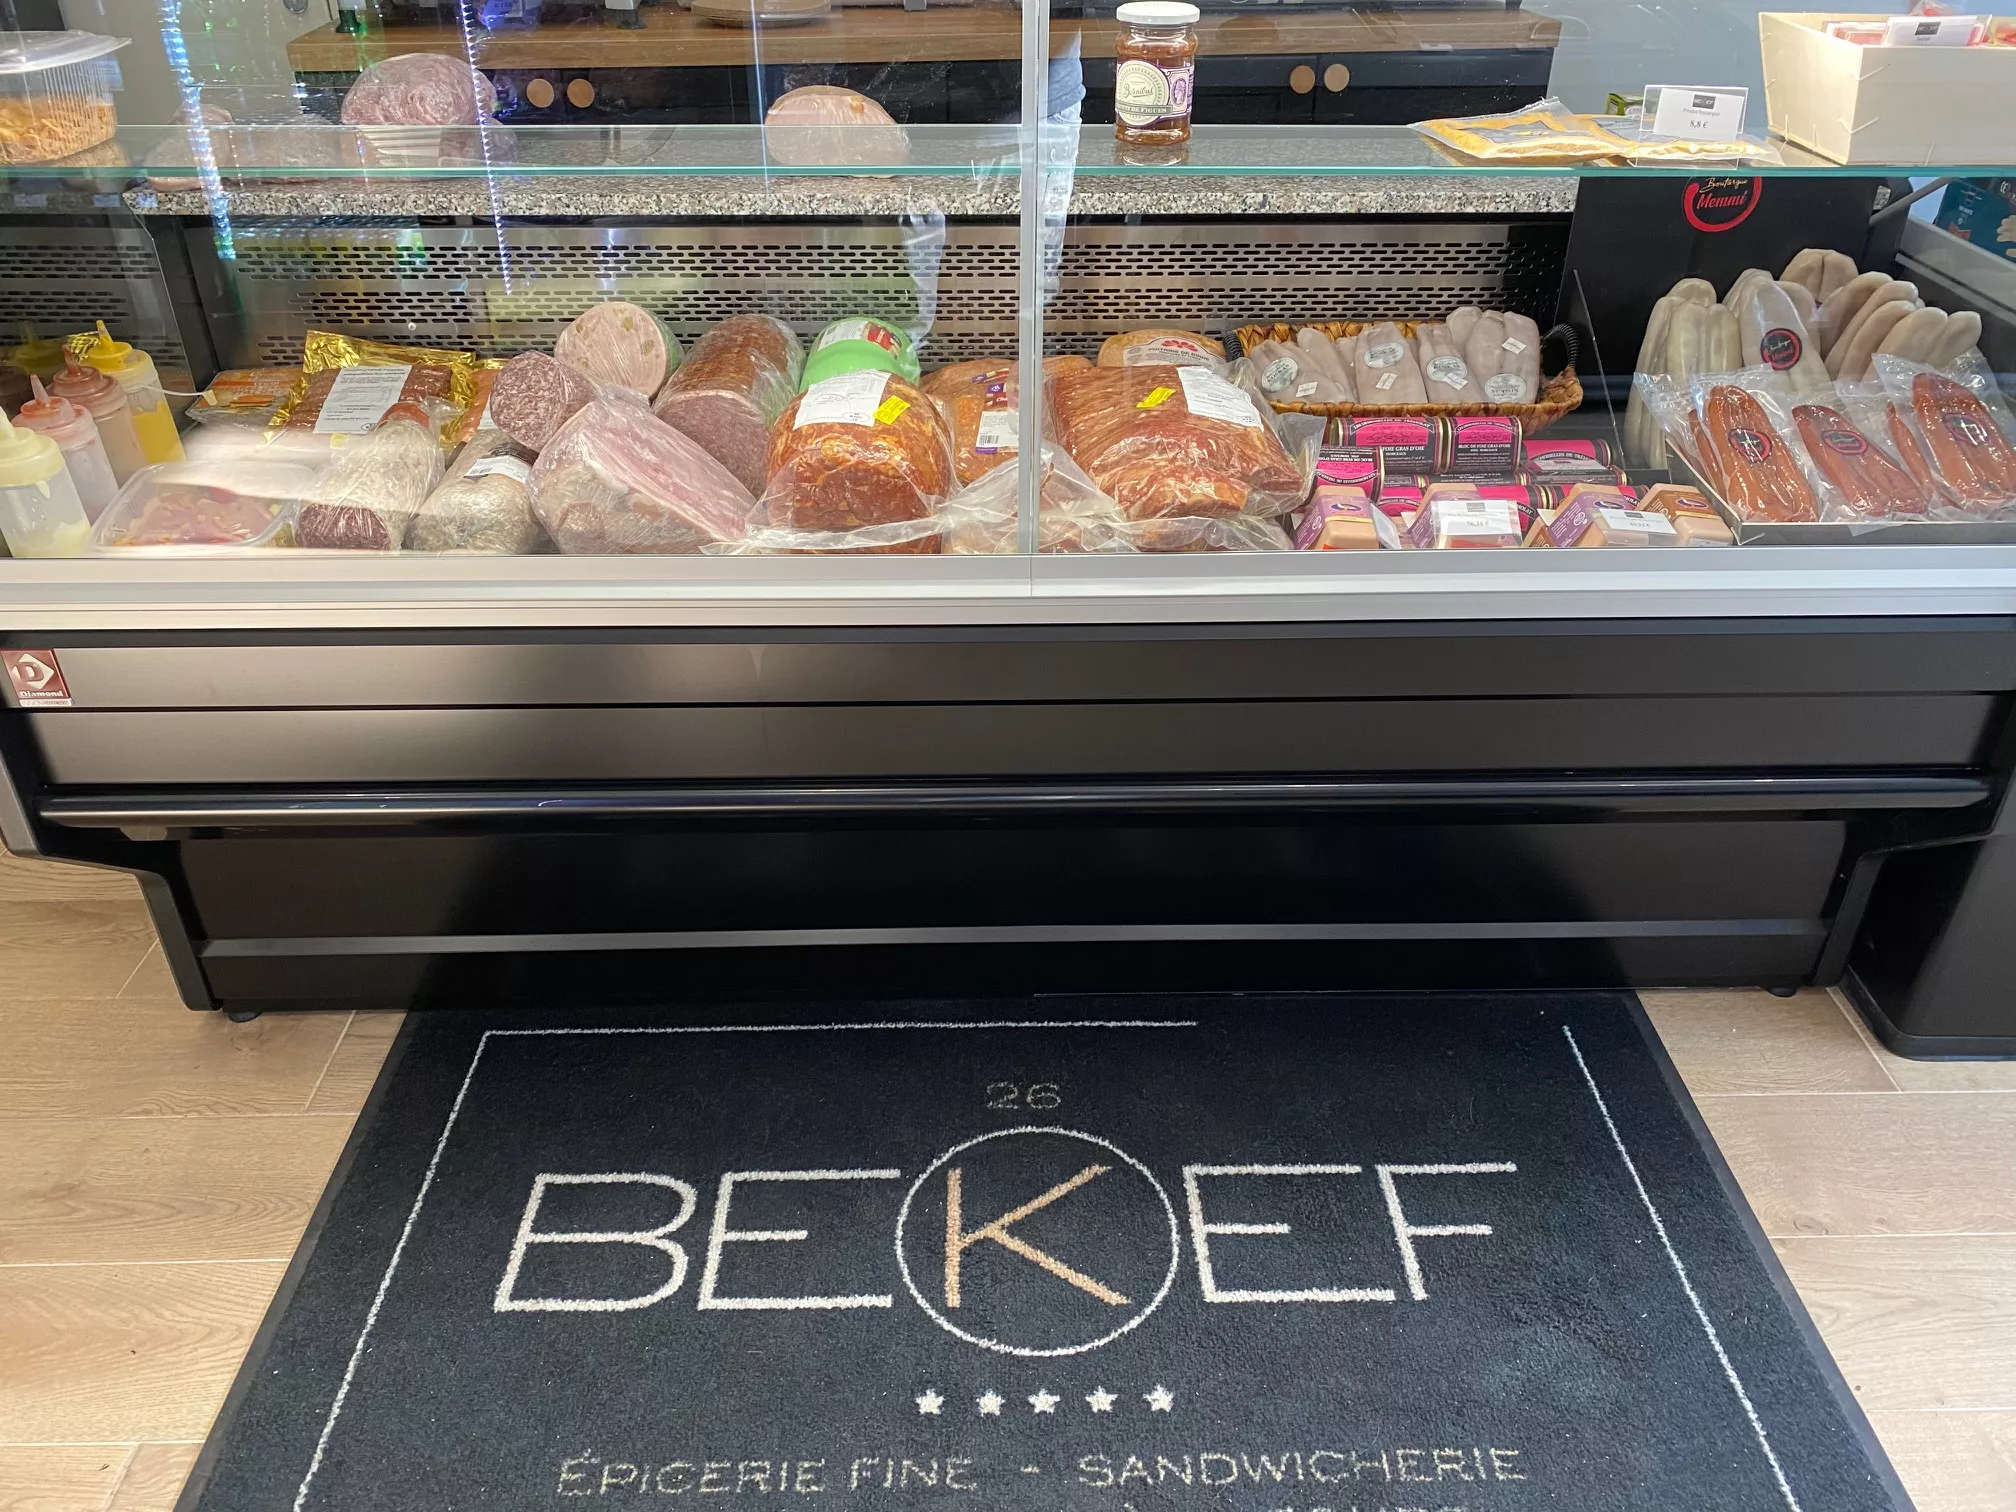 Bekef 26 in France, europe | Meat - Rated 4.8